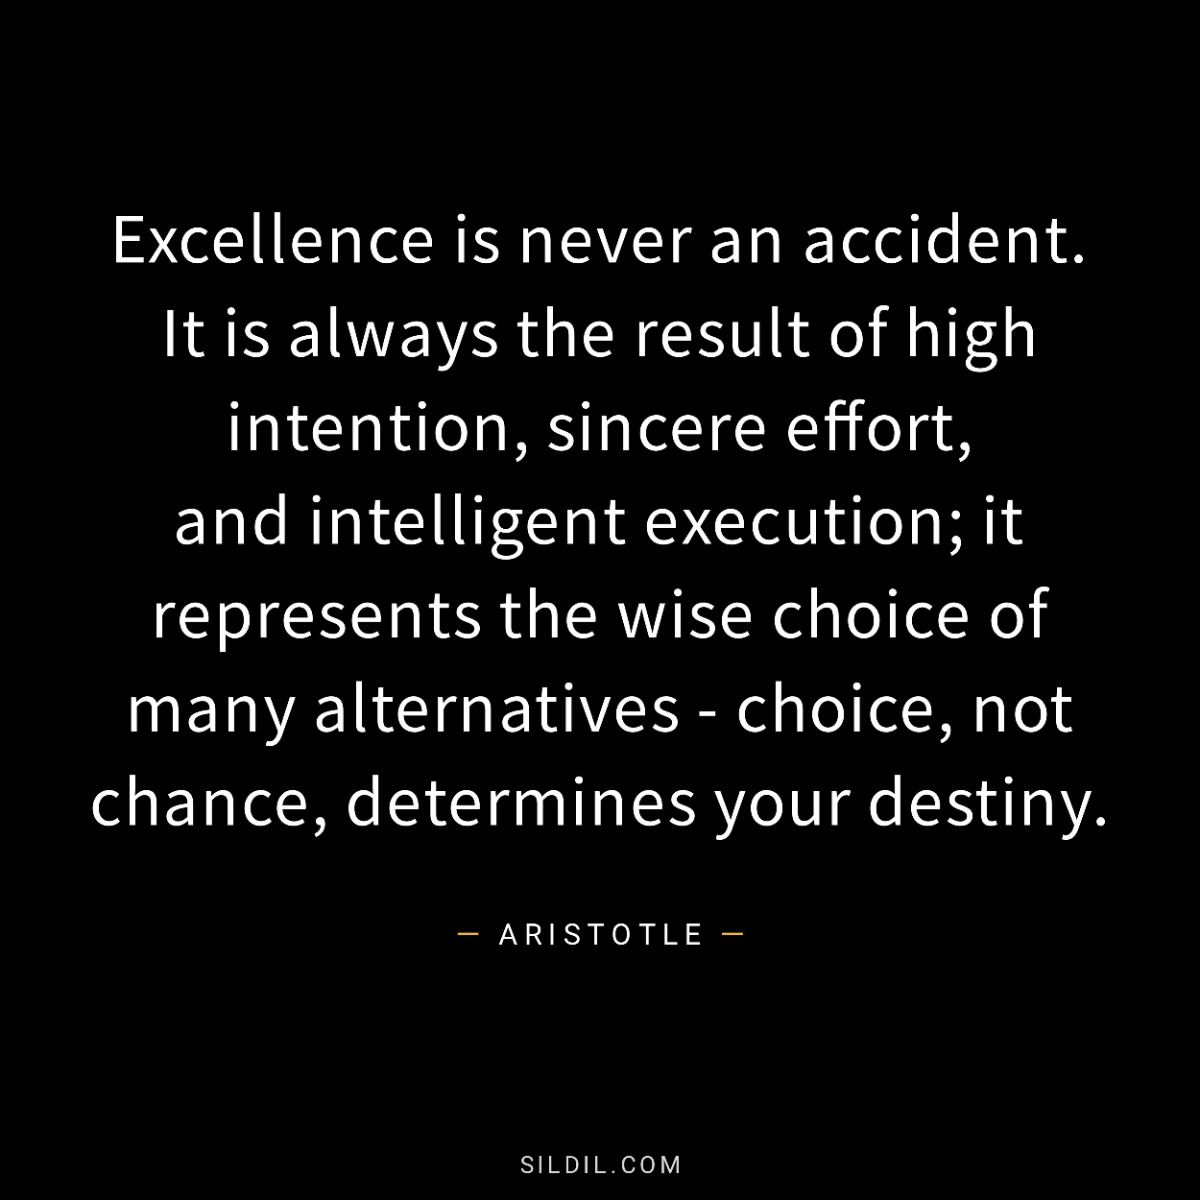 Excellence is never an accident. It is always the result of high intention, sincere effort, and intelligent execution; it represents the wise choice of many alternatives - choice, not chance, determines your destiny.